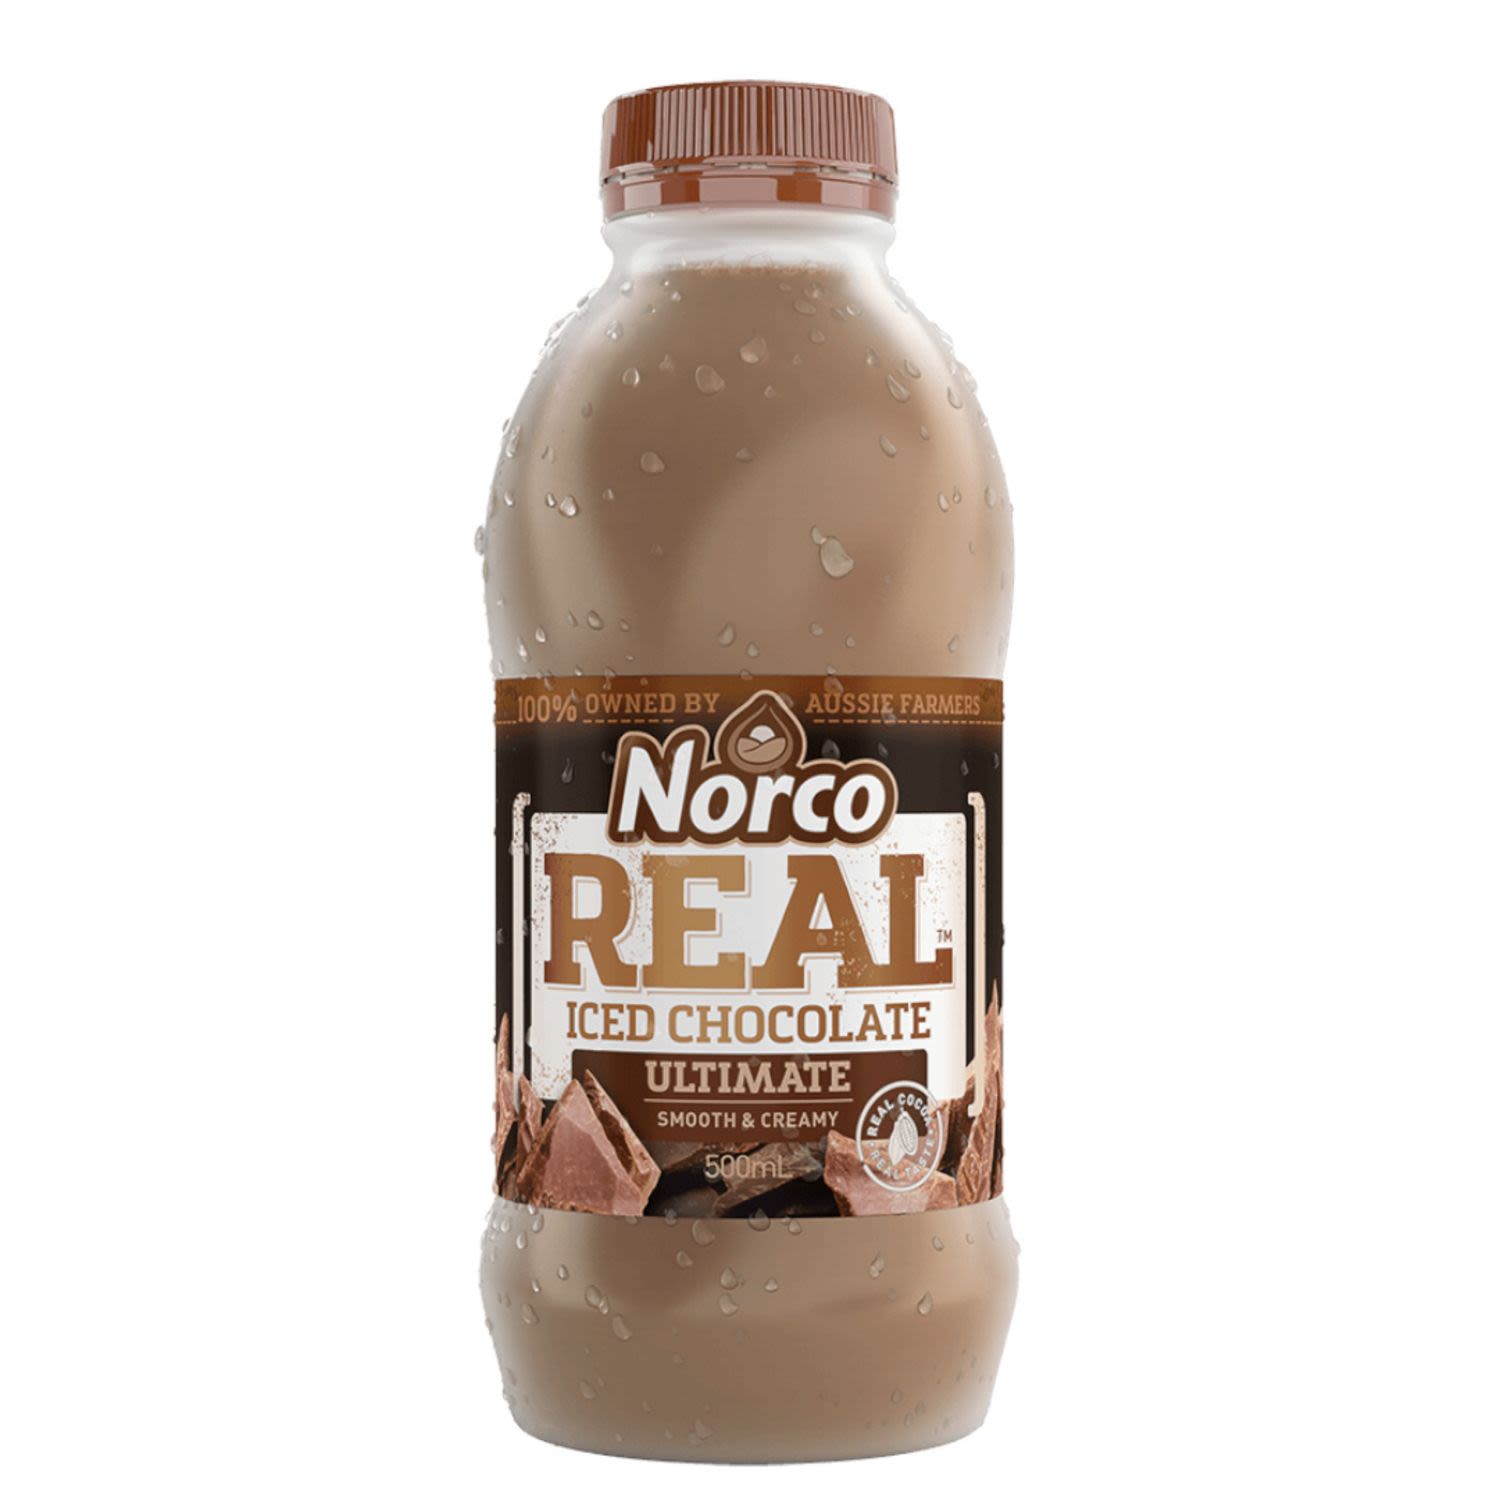 Norco Real Iced Chocolate, 500 Millilitre